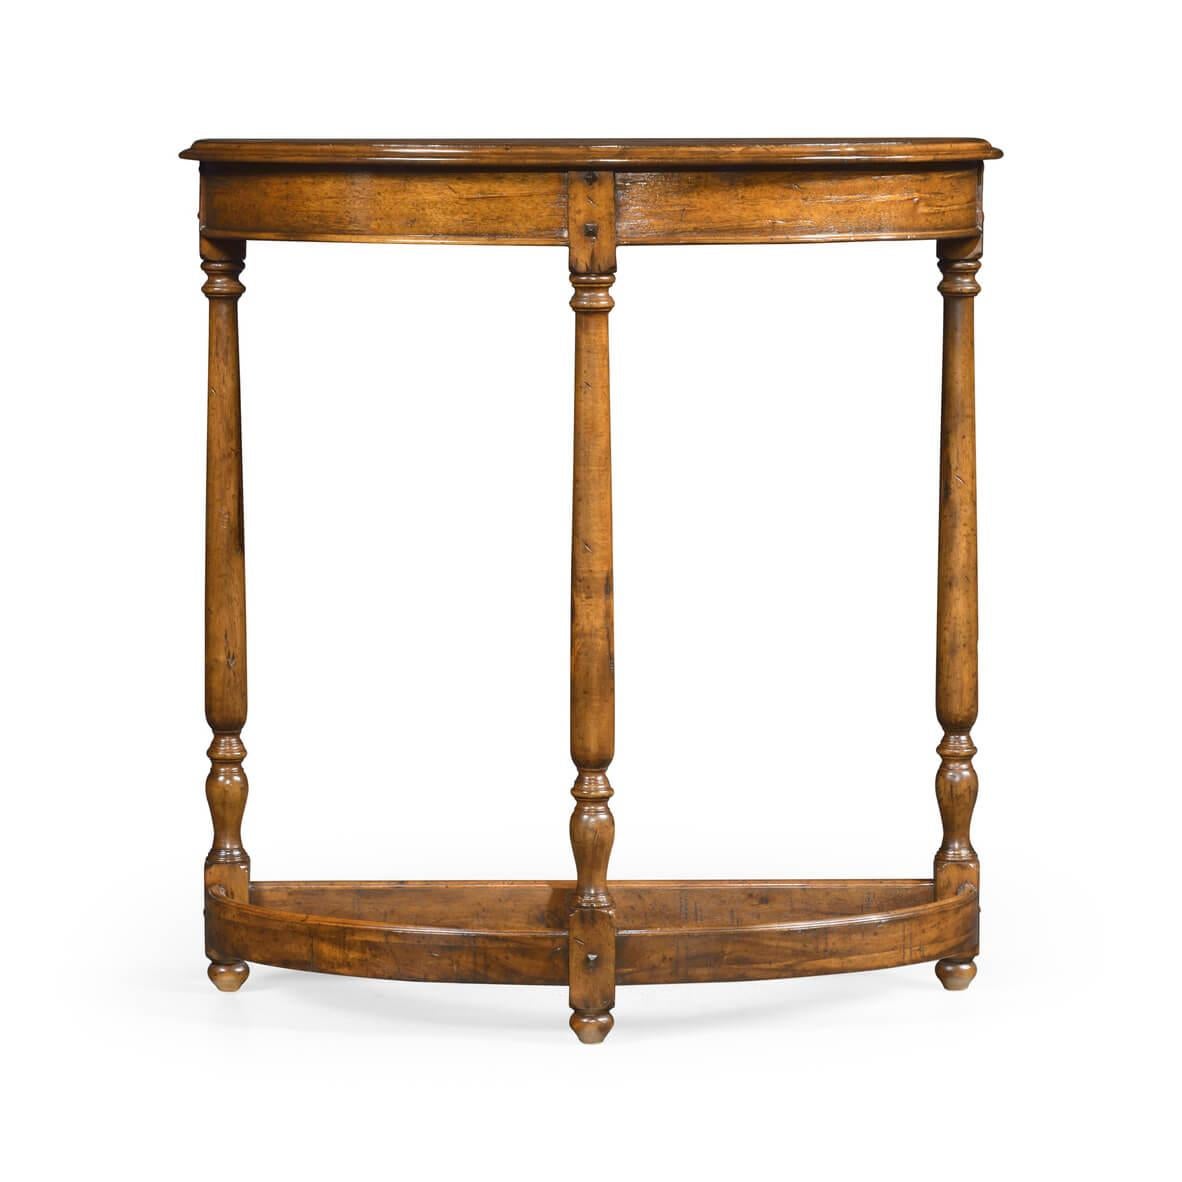 English country walnut demilune console table with molded edge, turned legs, and a molded frame stretcher base.

Dimensions: 32.5